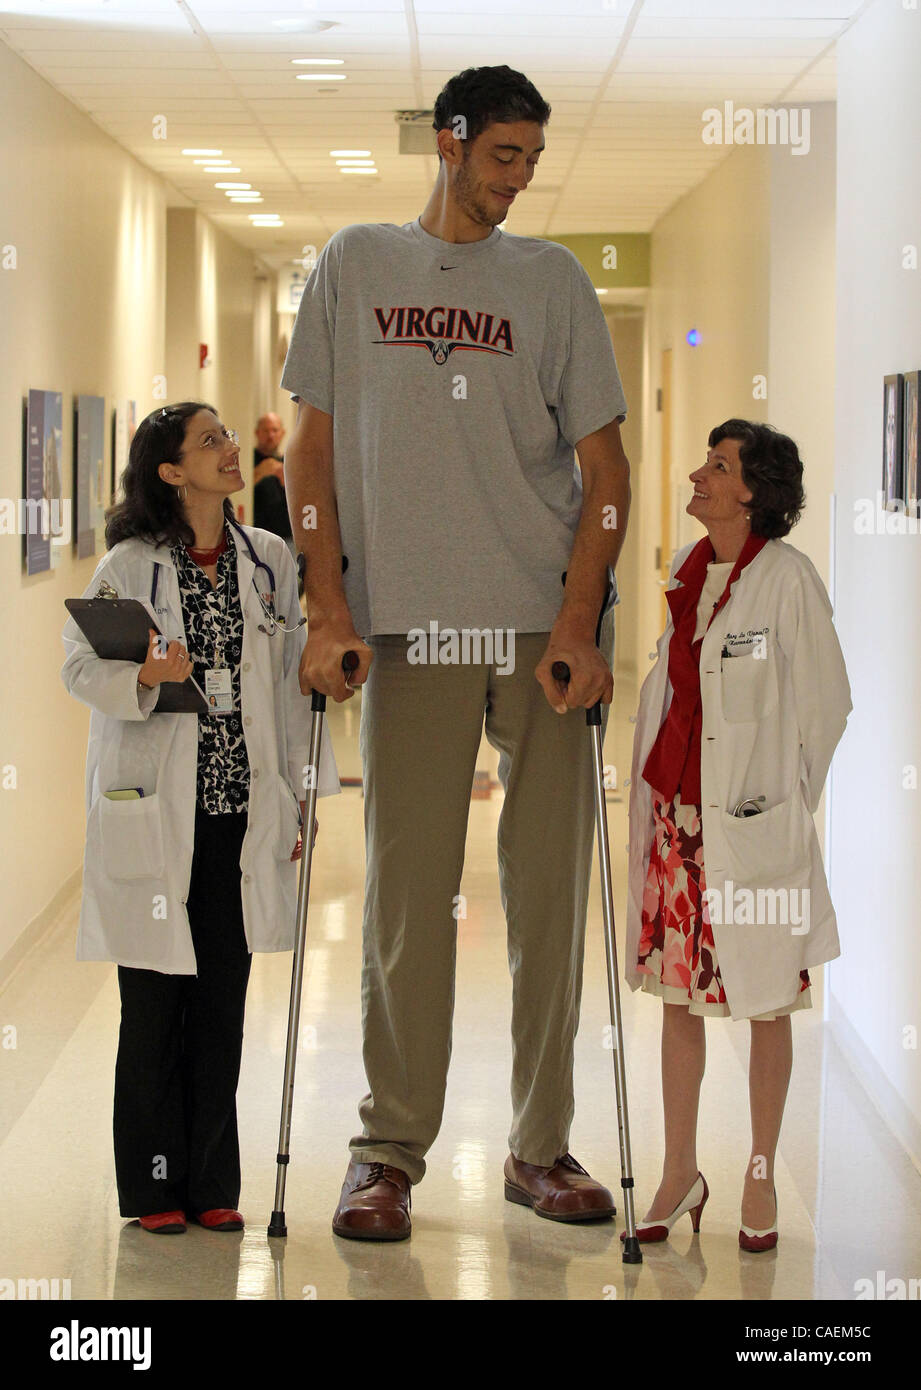 Aug. 20, 2010 - Charlottesville, Virginia, U.S. - University of Virginia endocrinologists Dr. CRISTINA GHERGHE, left, and Dr. MARY LEE VANCE, right, stand with the world's tallest man SULTAN KOSEN Friday at the University of Virginia Medical Center. Turkish-born Kosen, who stands 8ft. 2inches tall,  Stock Photo